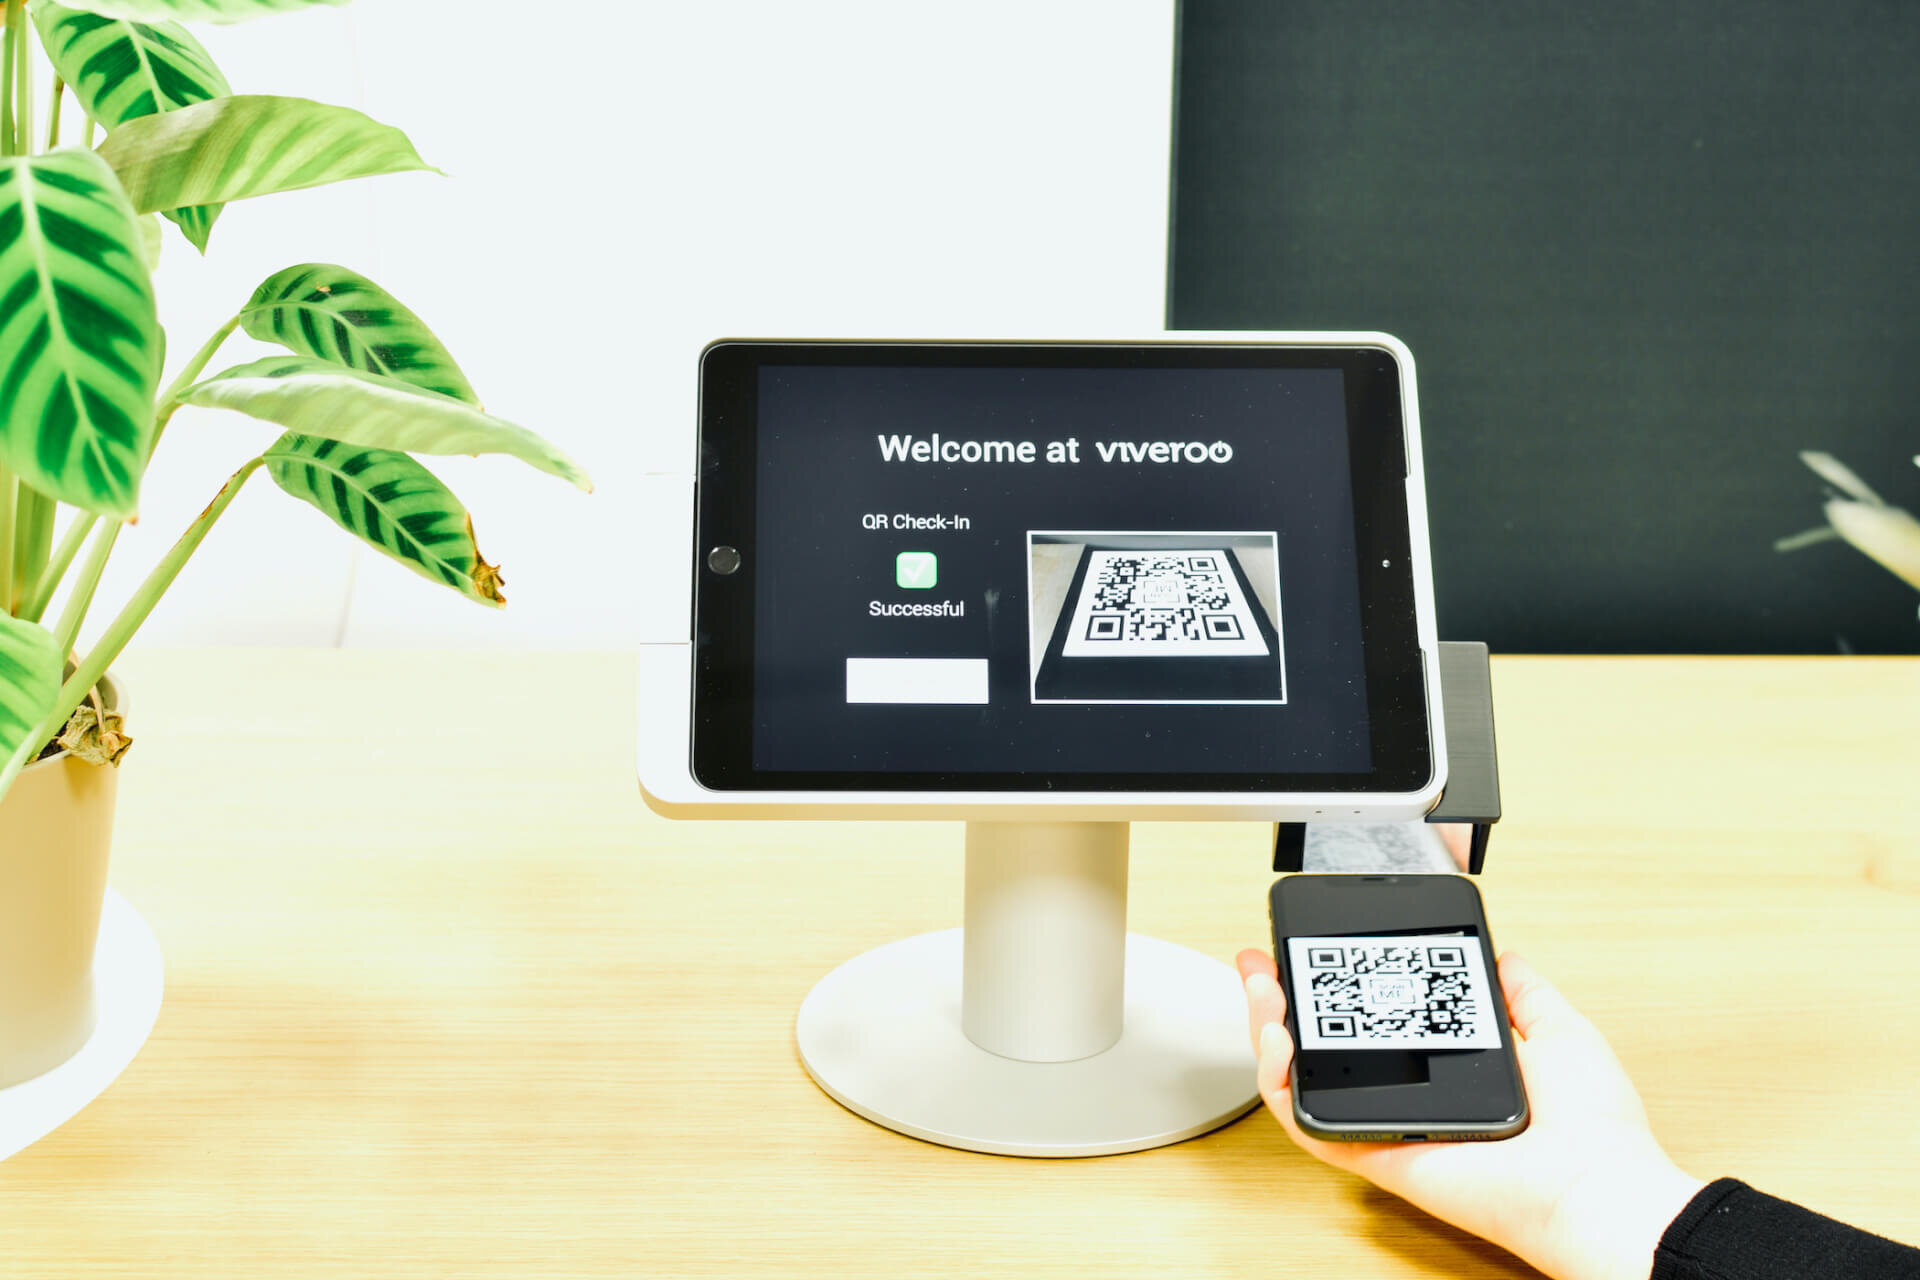 Viveroo USA One Kiosk Stand Apple iPad Mount Furniture Dock Retail Hospitality Point of Sales Back Scanner